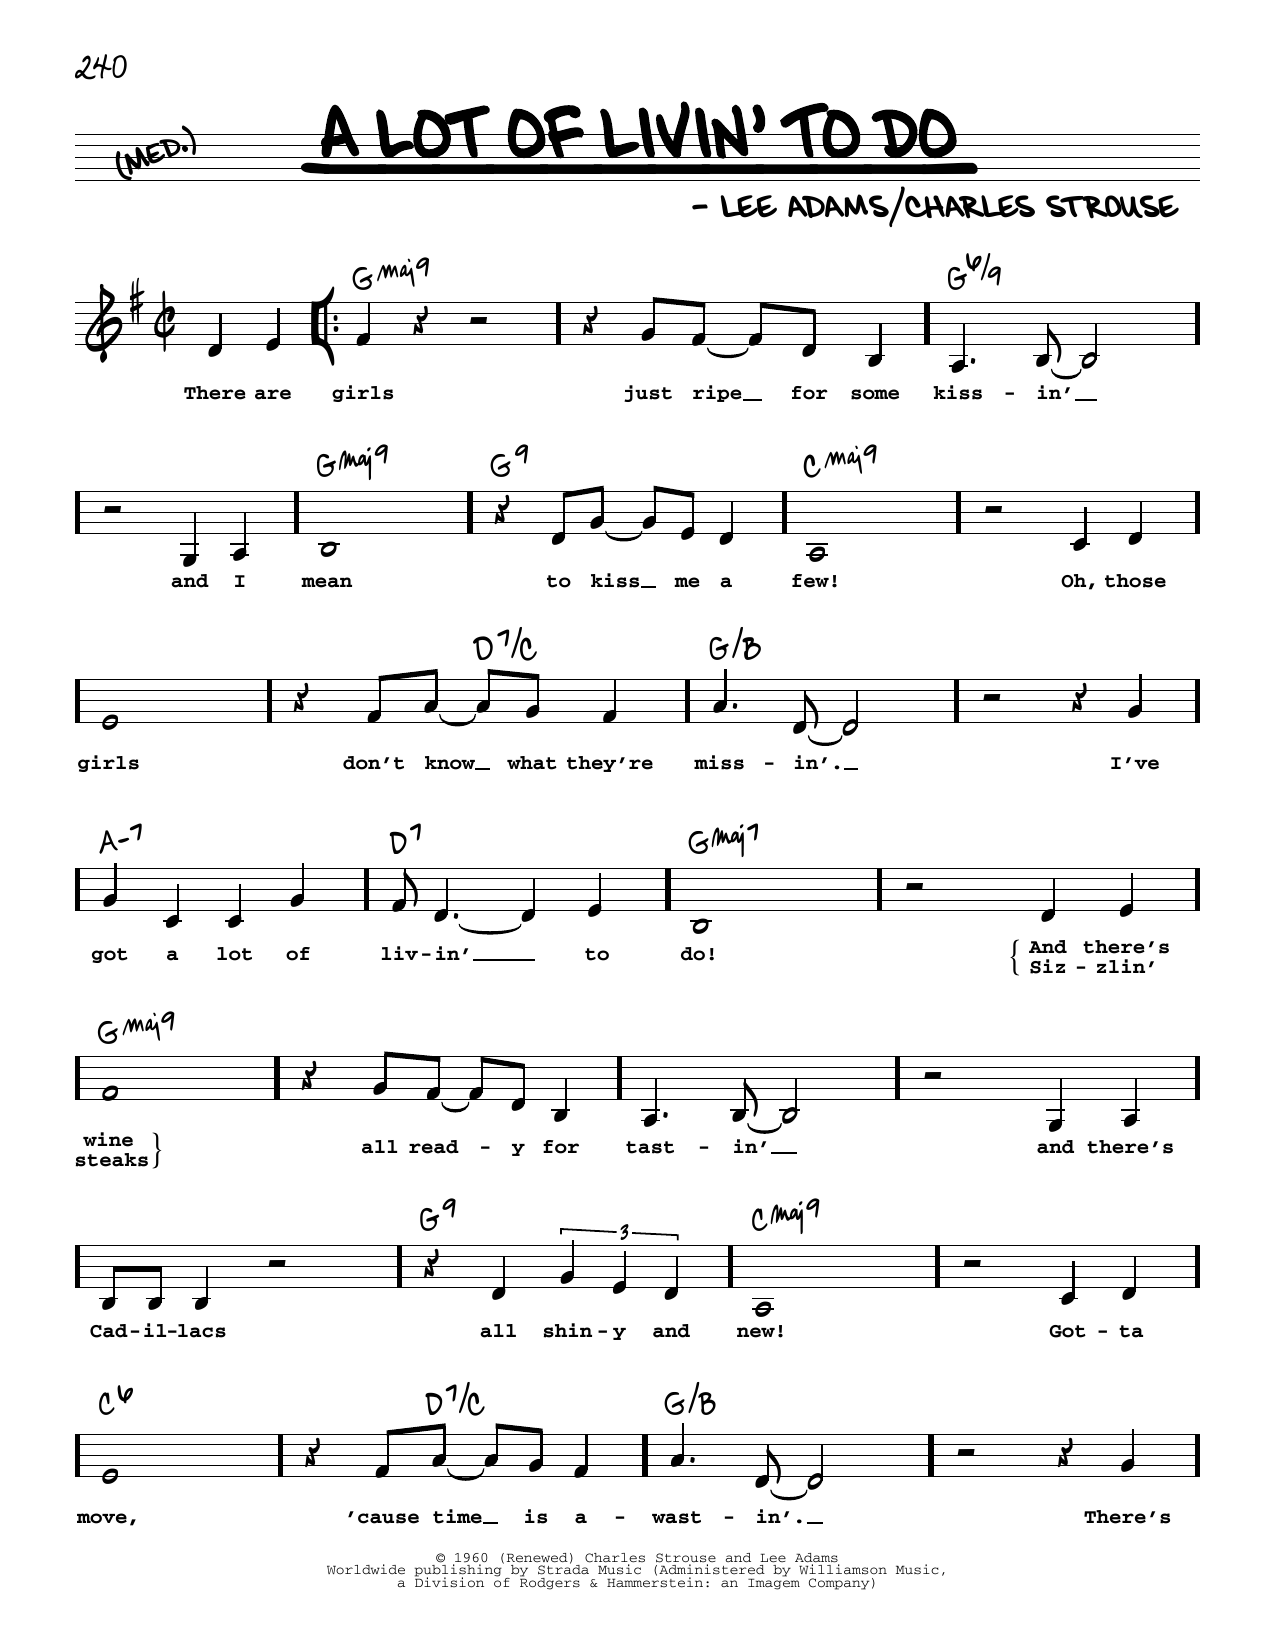 Download Bryan Adams A Lot Of Livin' To Do (Low Voice) Sheet Music